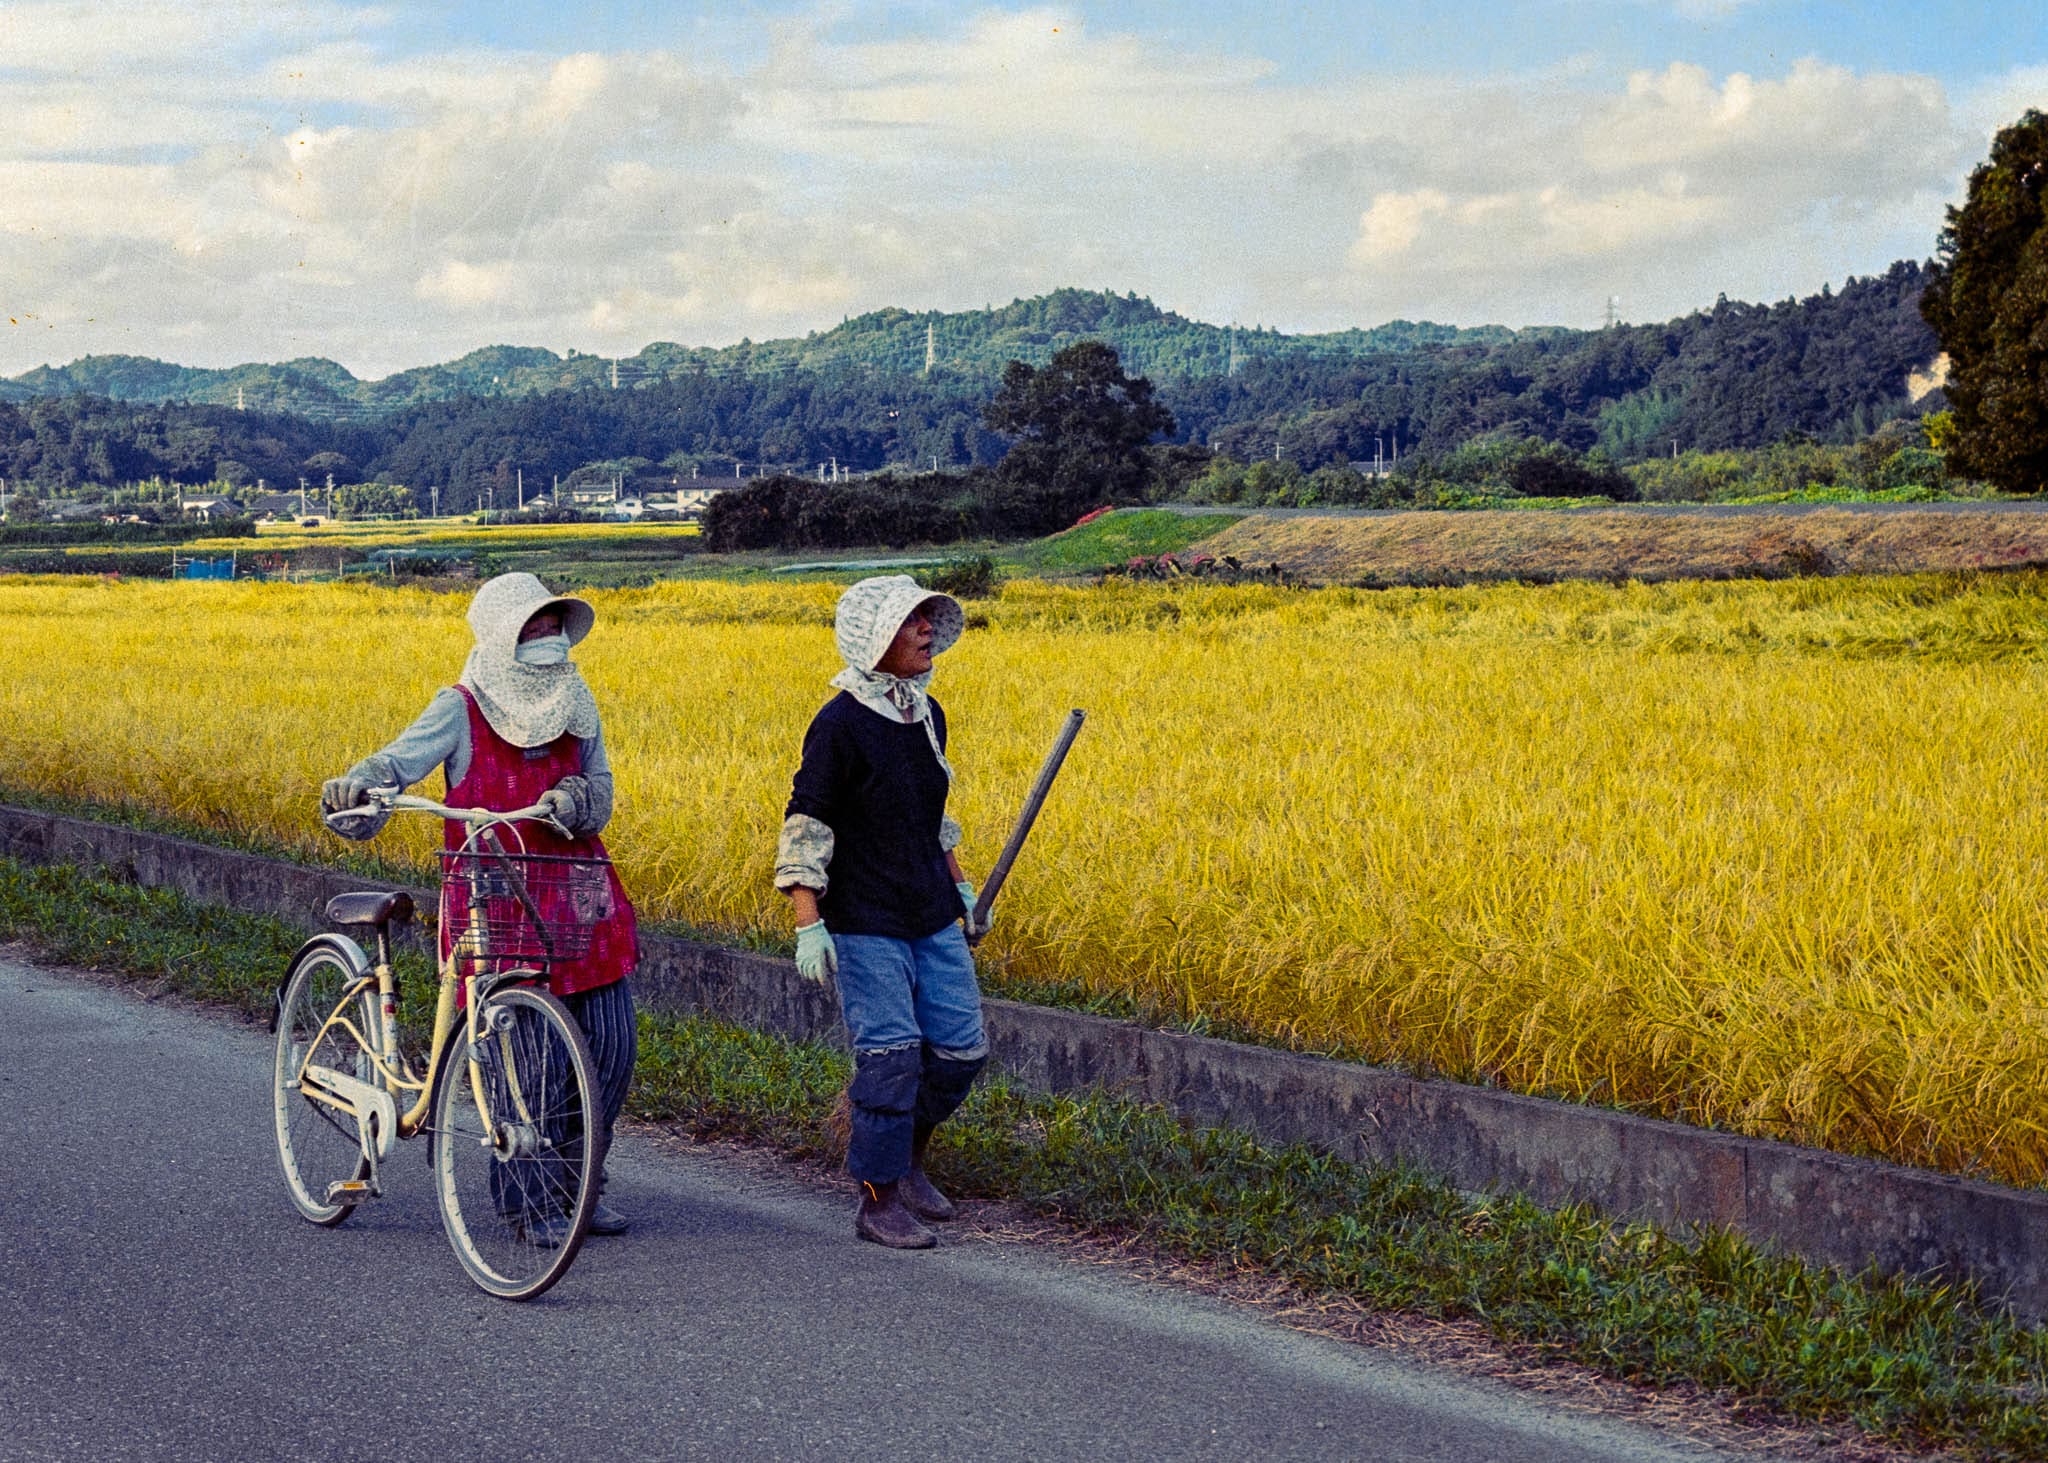 Bicyclist and farmer amidst a vibrant, golden field in a serene rural setting.